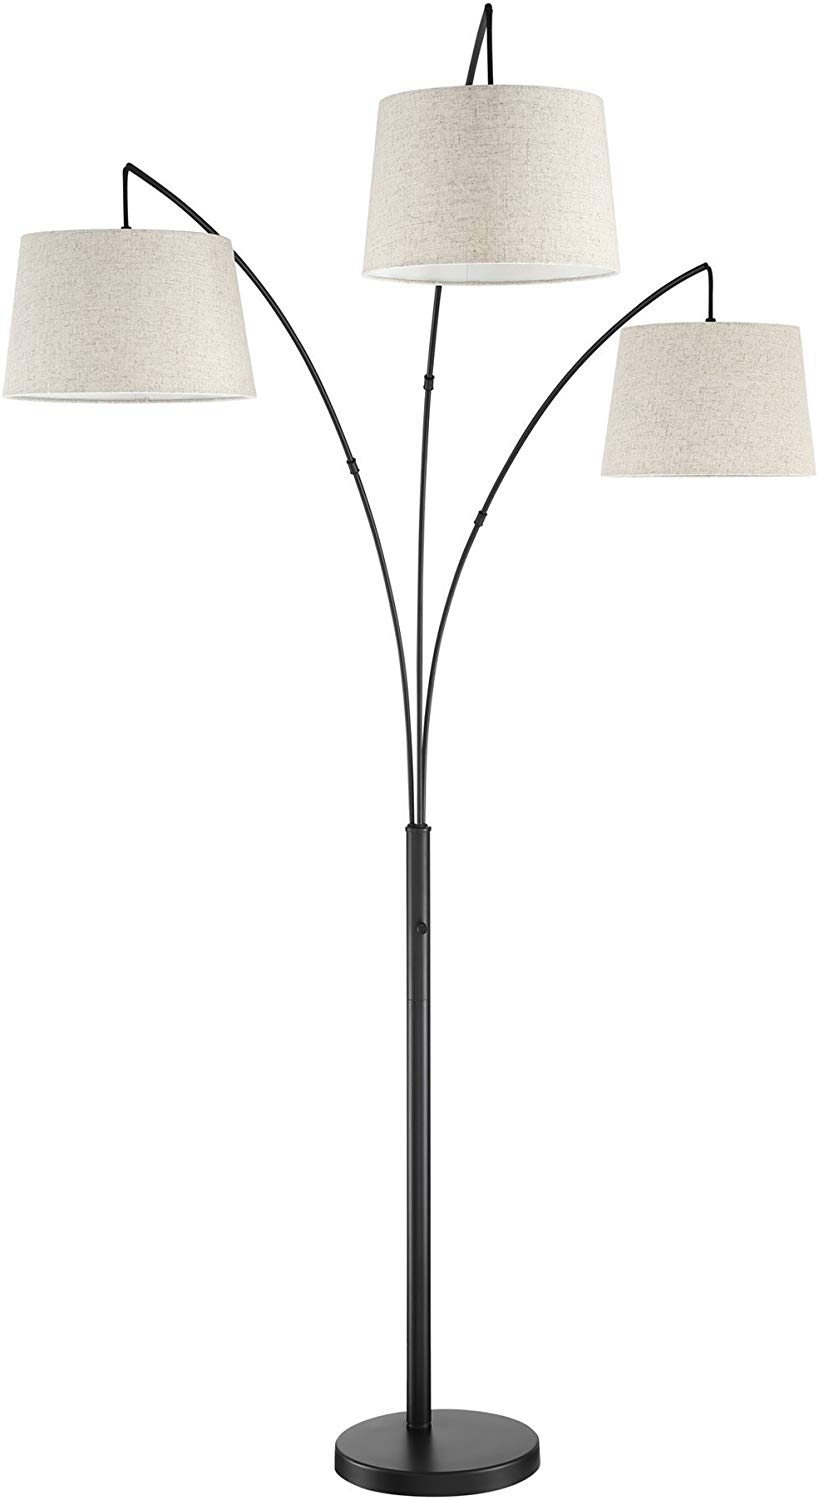 a three headed floor lamp with white hanging shades